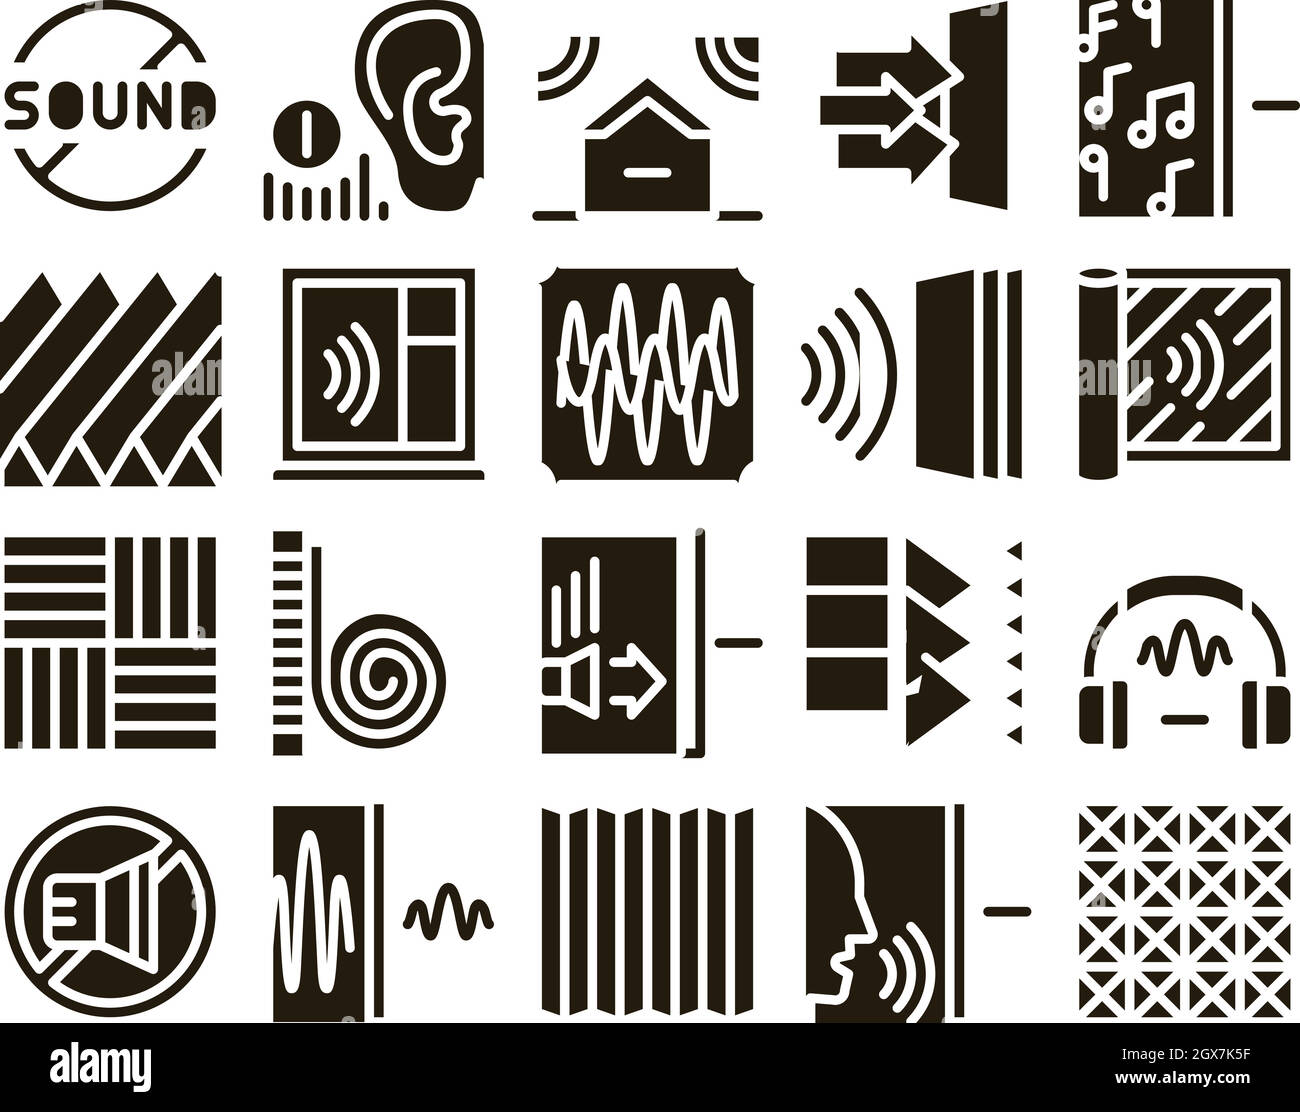 Soundproofing Building Material Icons Set Vector Stock Vector